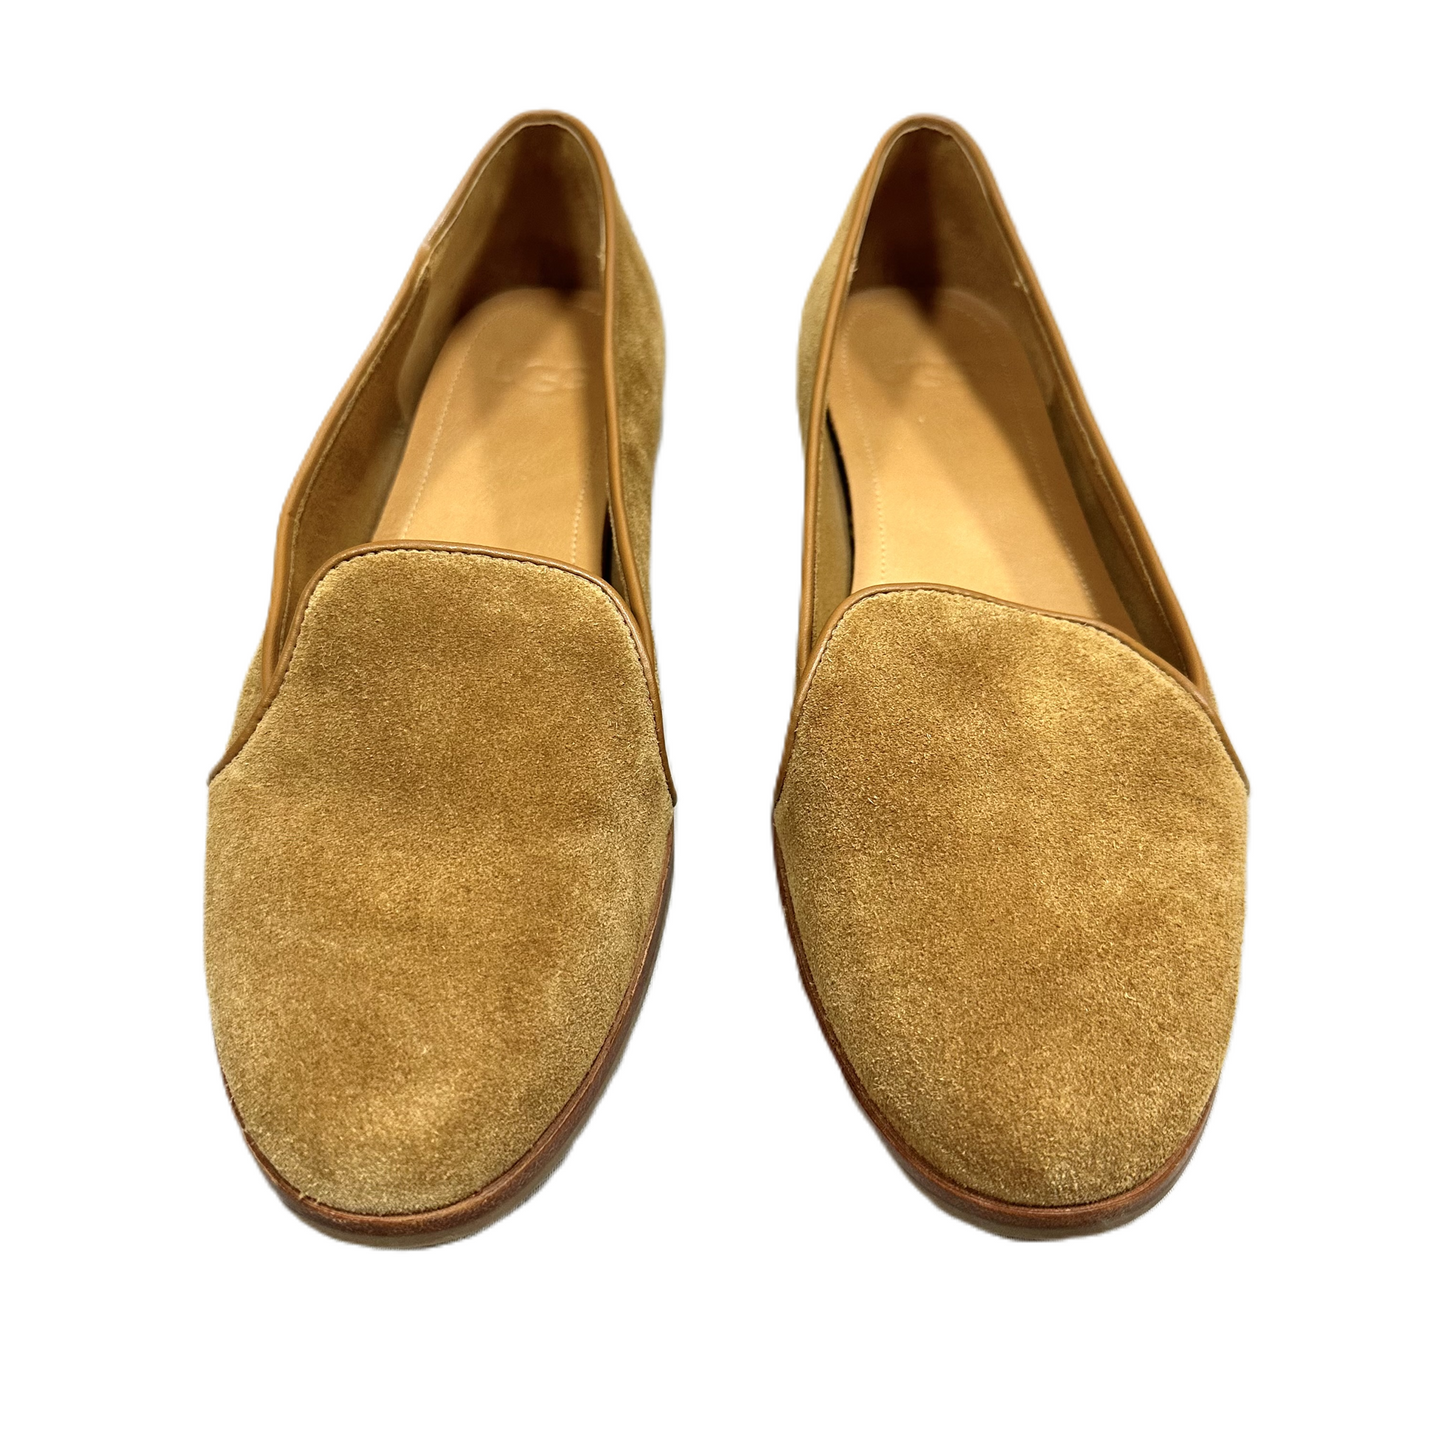 Shoes Flats By Ugg  Size: 8